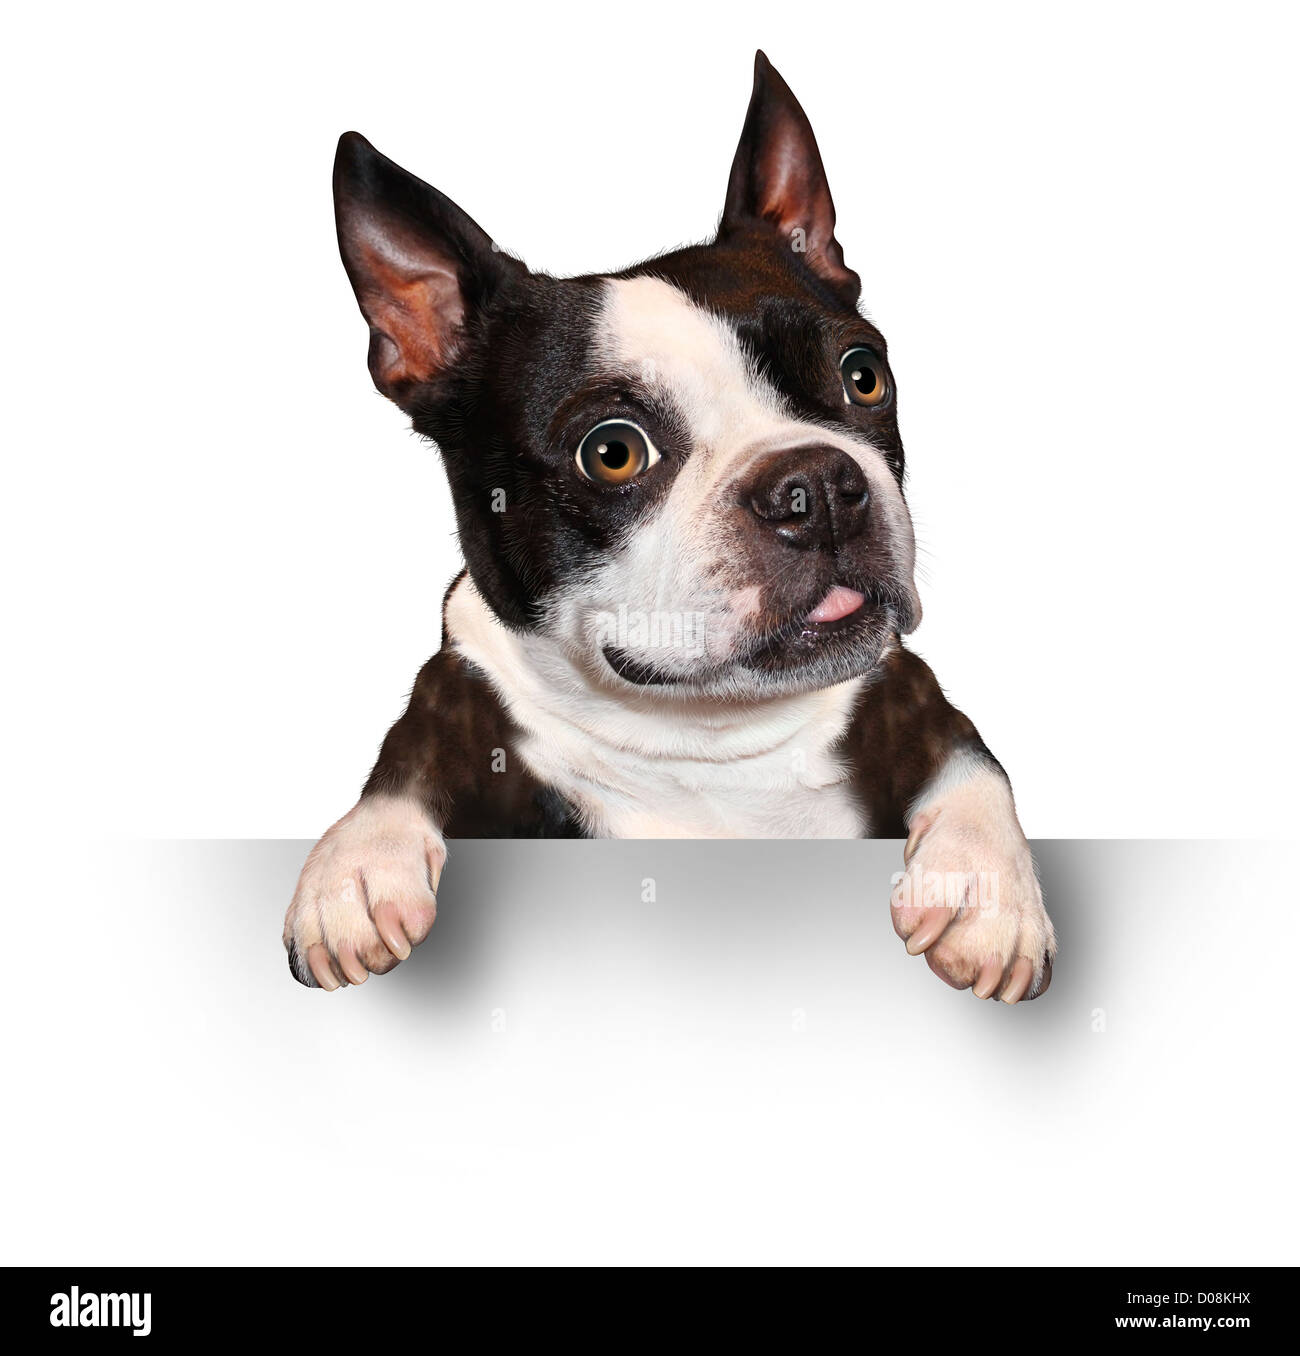 Cute dog holding a blank sign as a Boston Terrier with a smiling happy expression sending a message pertaining to pet care on a Stock Photo